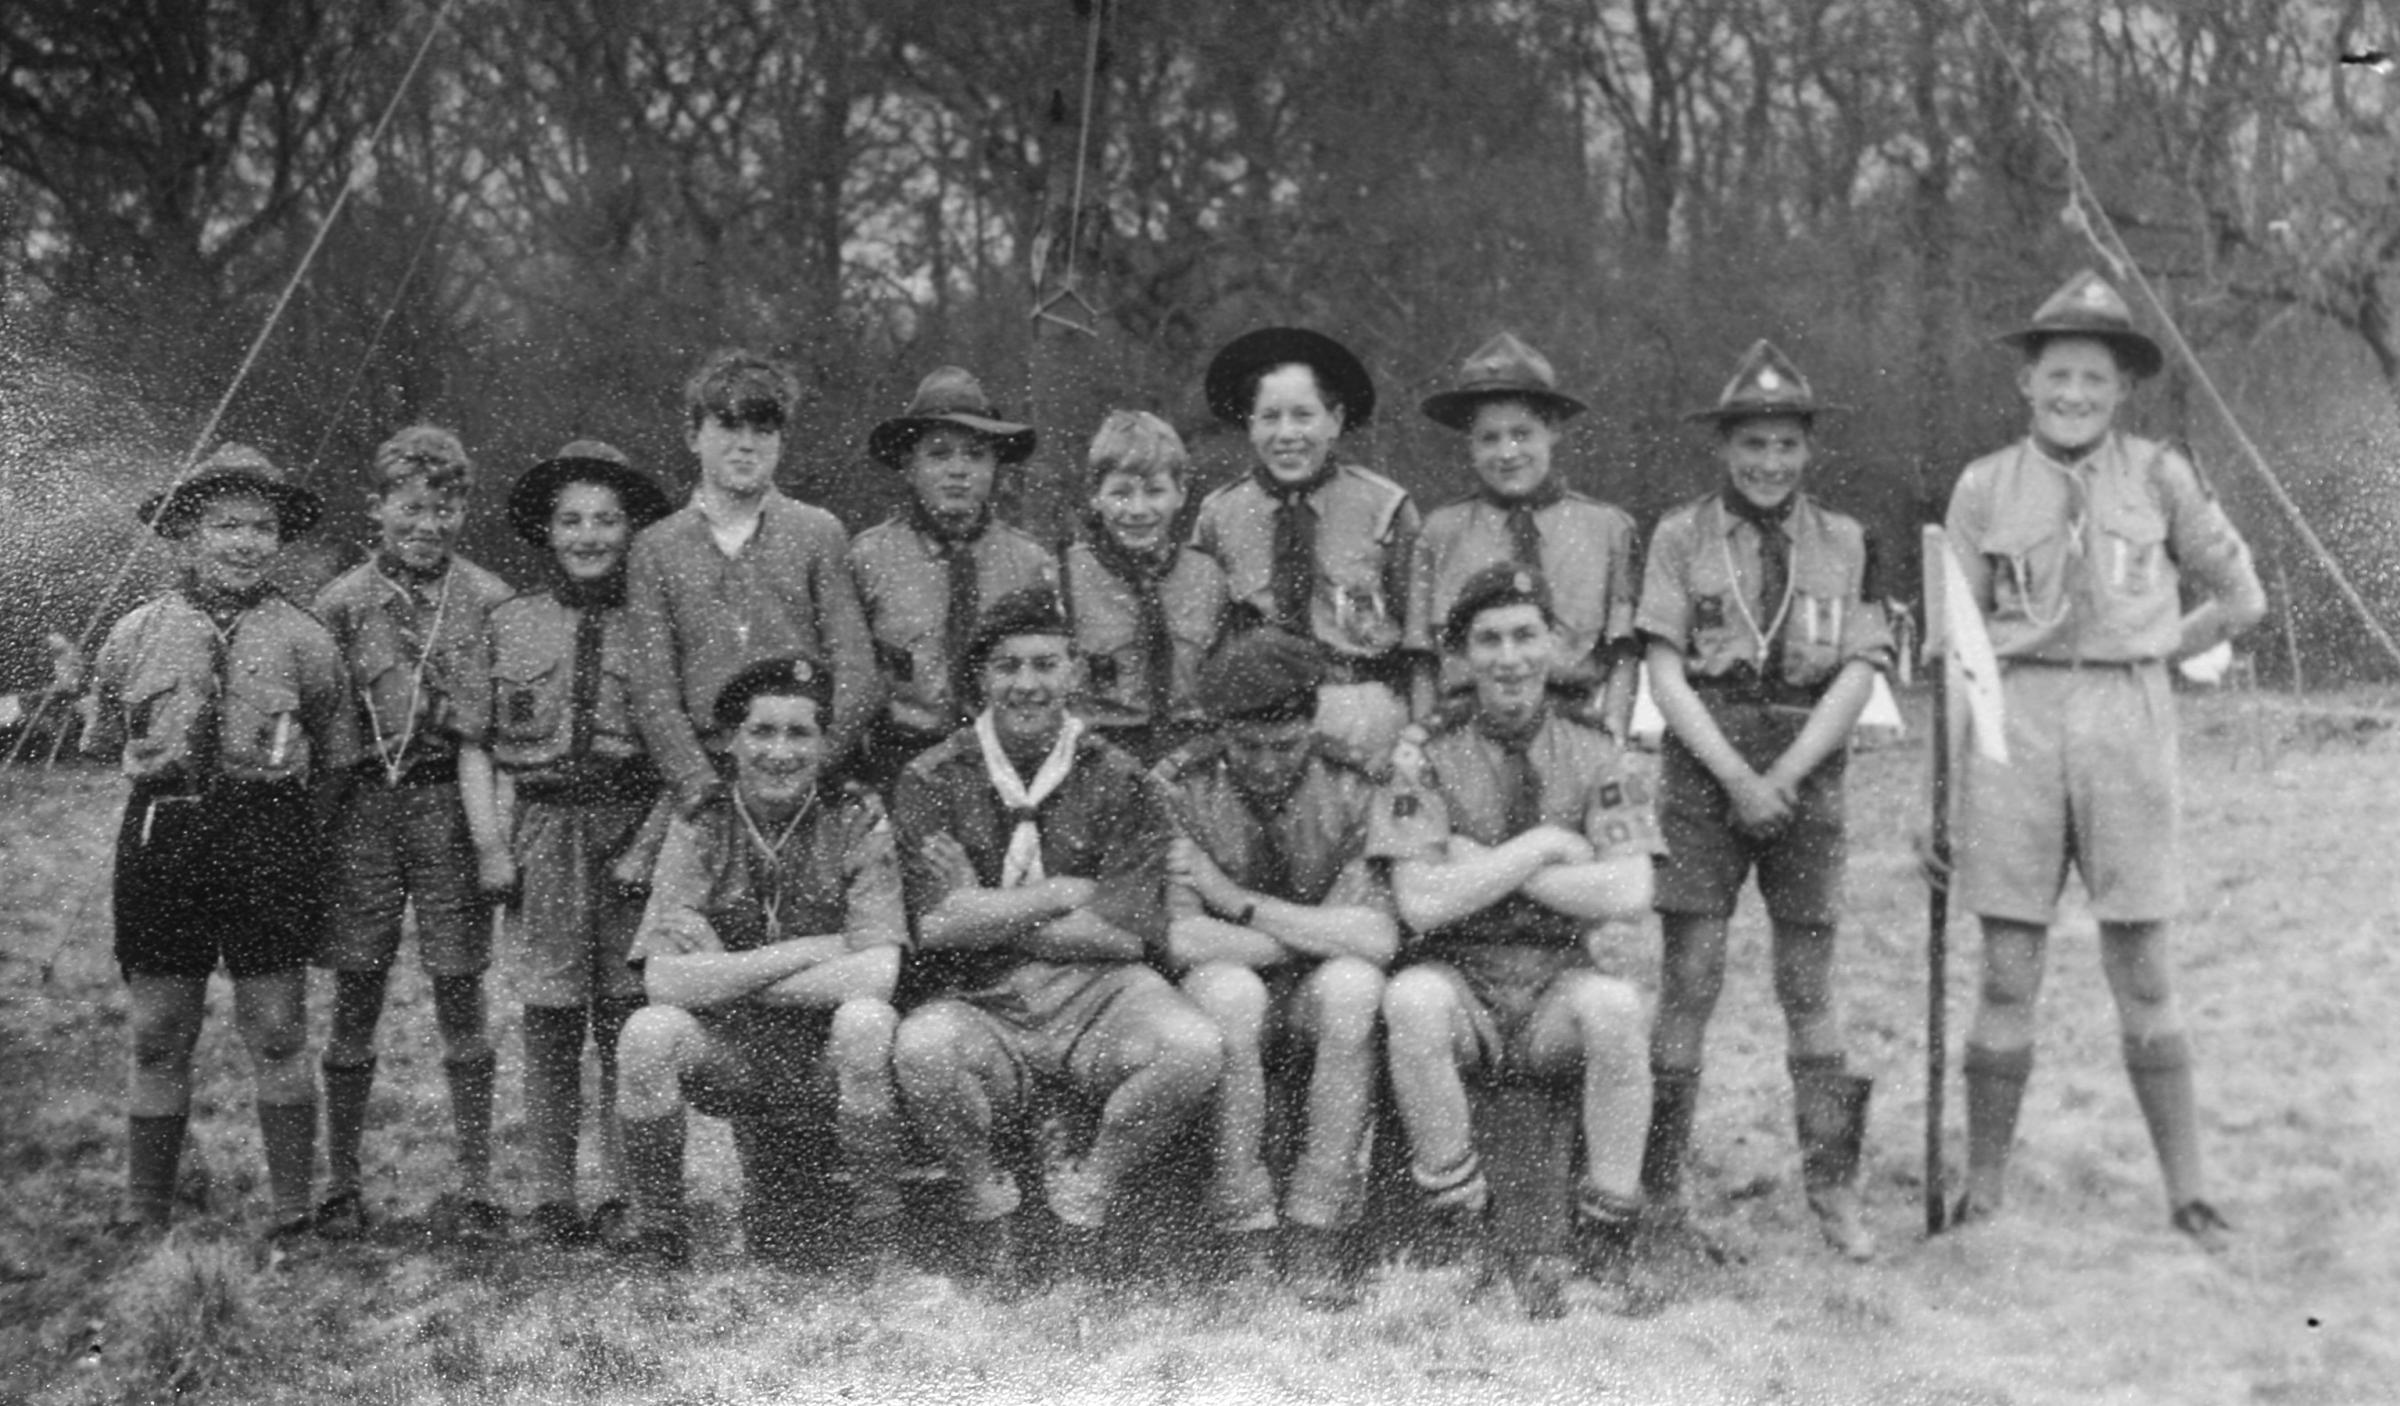 Collect of Fair Oak Scouts in summer 1958, for SCs Fair Oak scouts centenary story